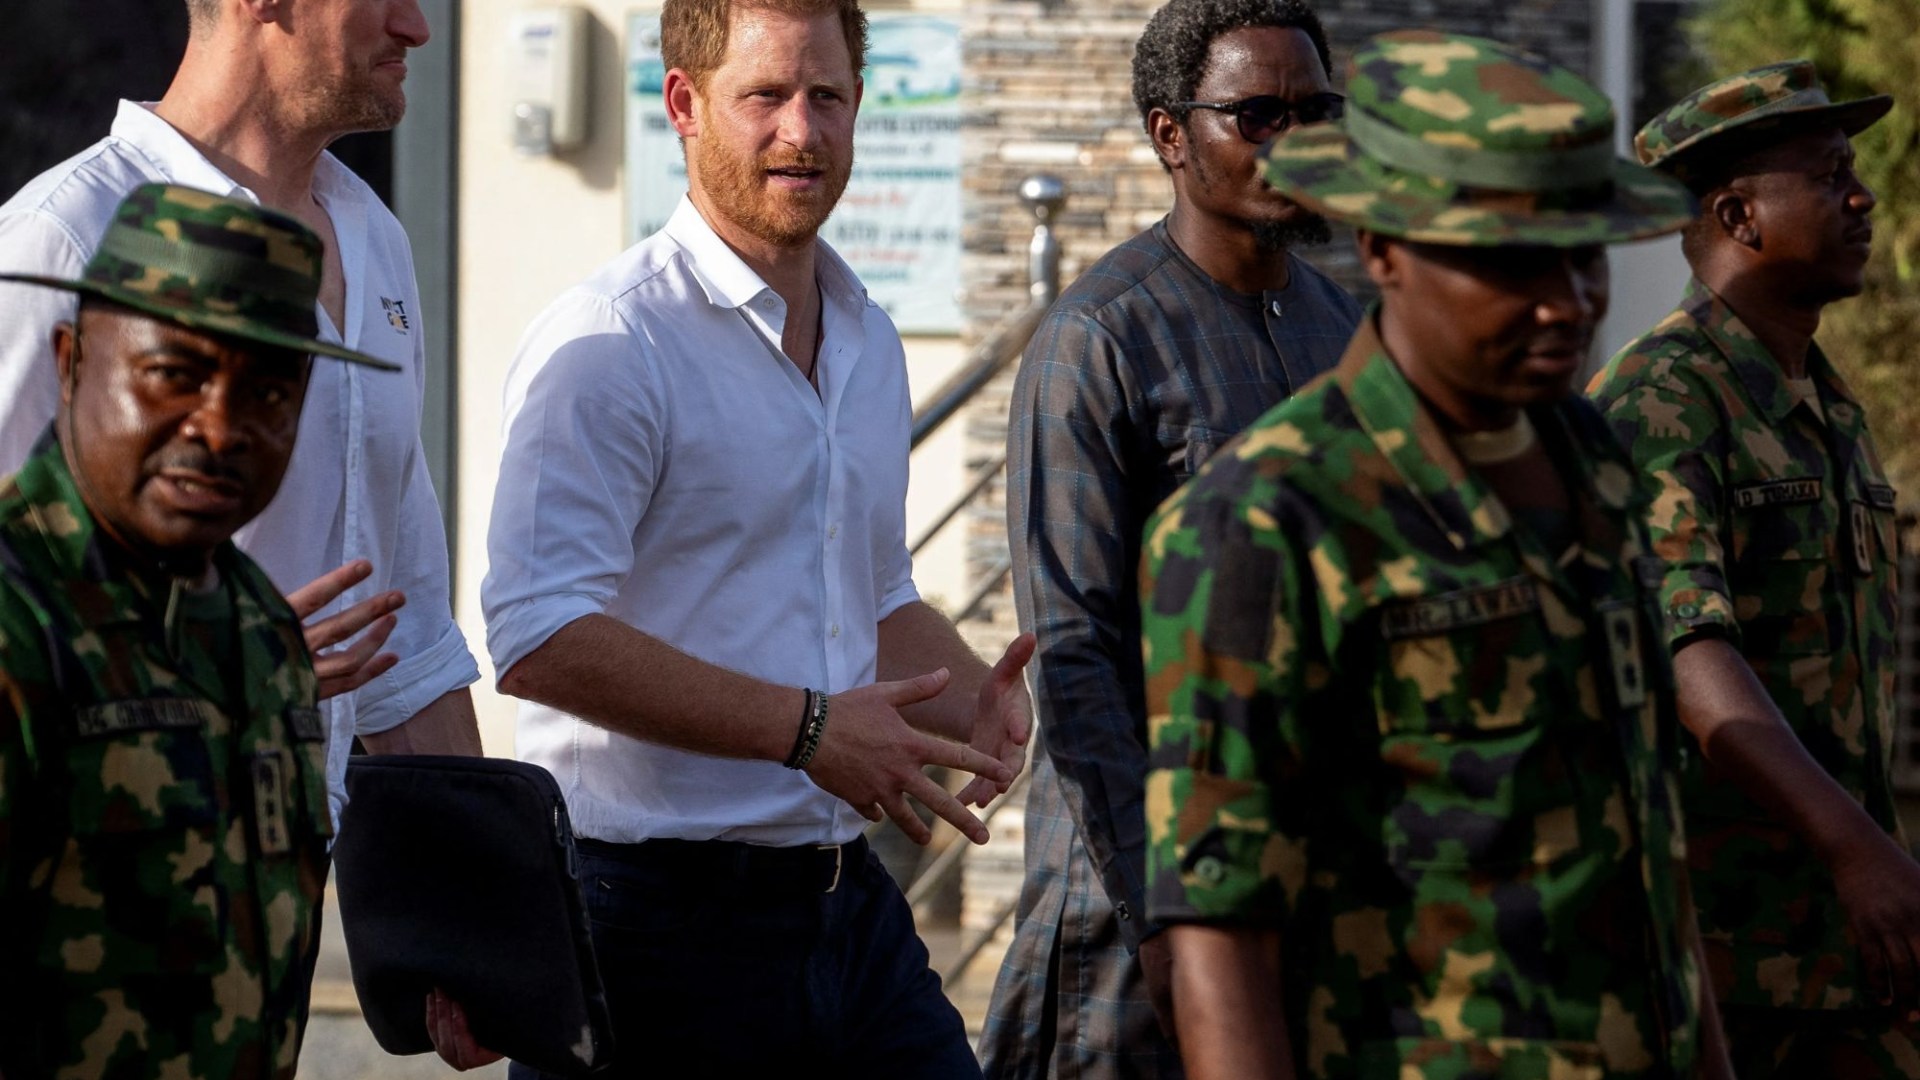 Prince Harry leaves Meghan behind to fly to dangerous Nigerian ‘no-go zone’ despite kicking off over UK security fears [Video]